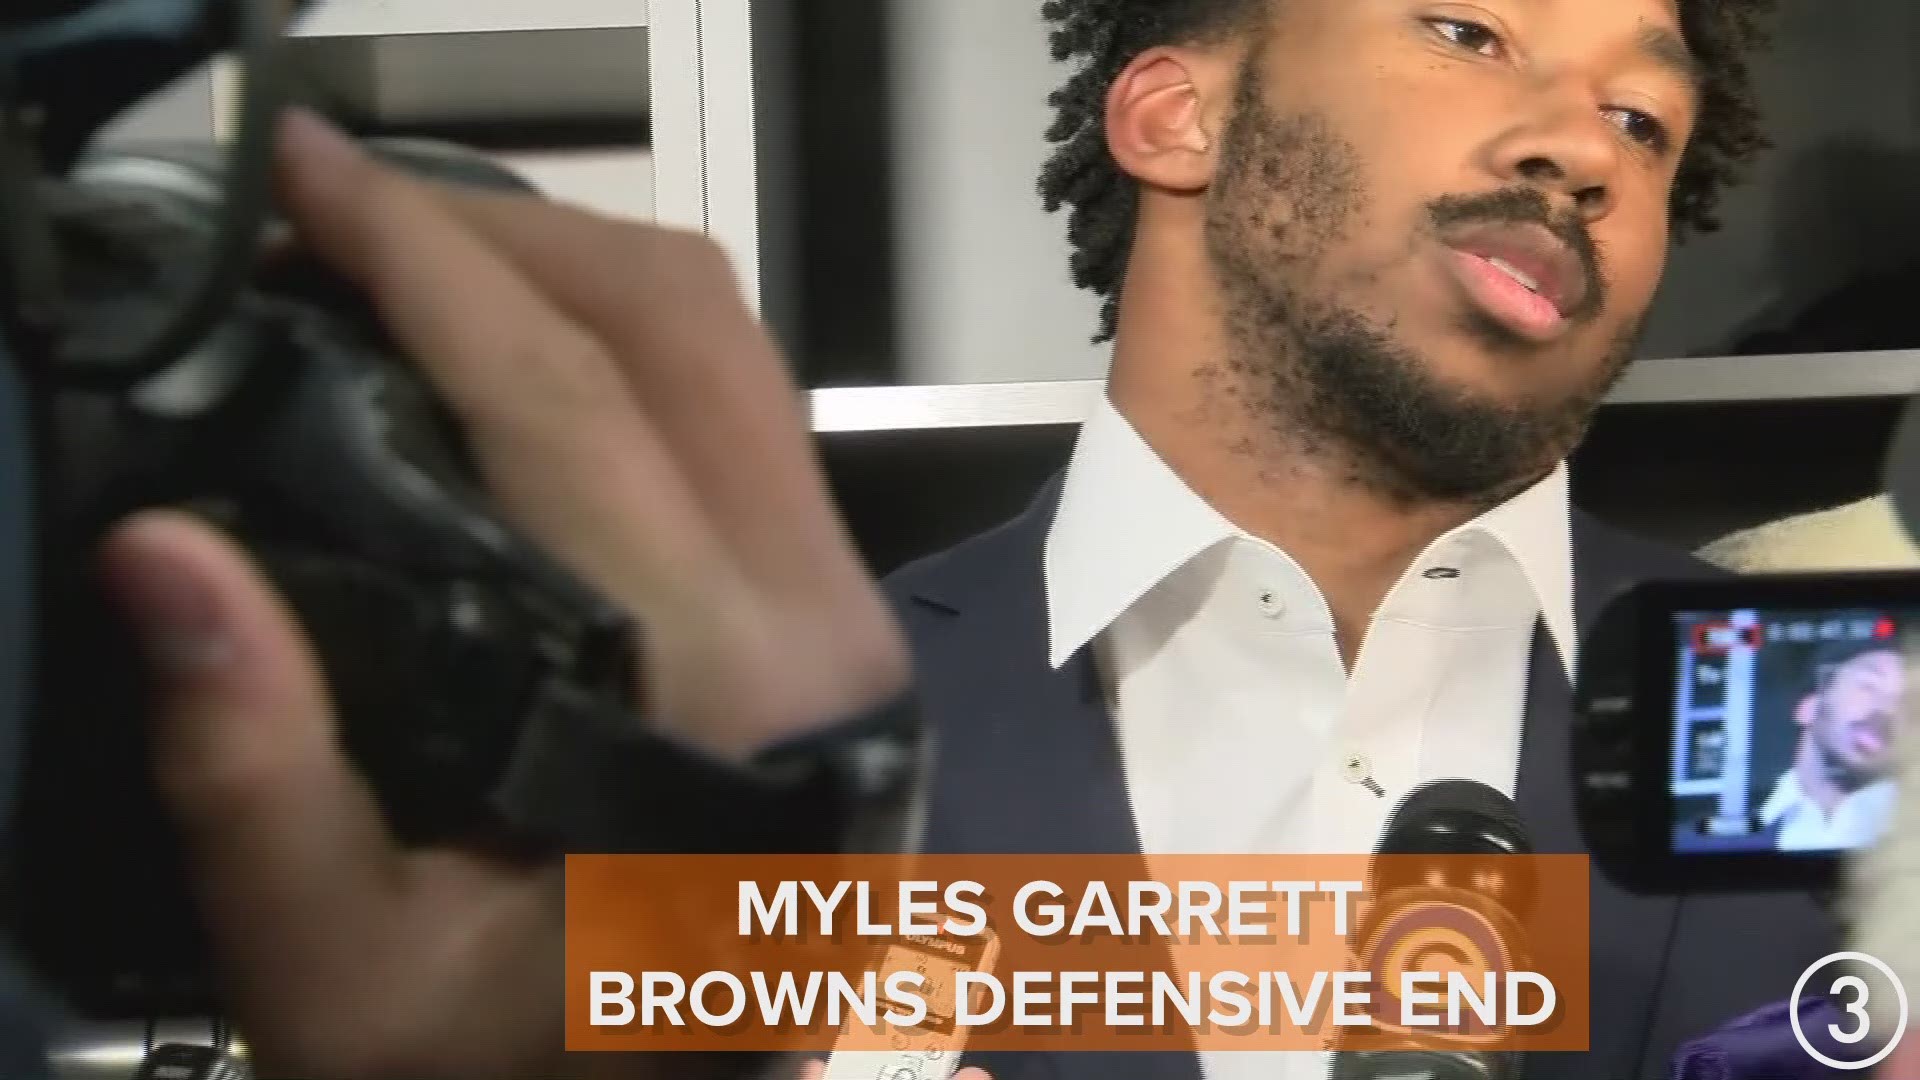 Social media had plenty to say about the fight between Myles Garrett and Mason Rudolph that ended the Cleveland Browns' game vs. the Pittsburgh Steelers.